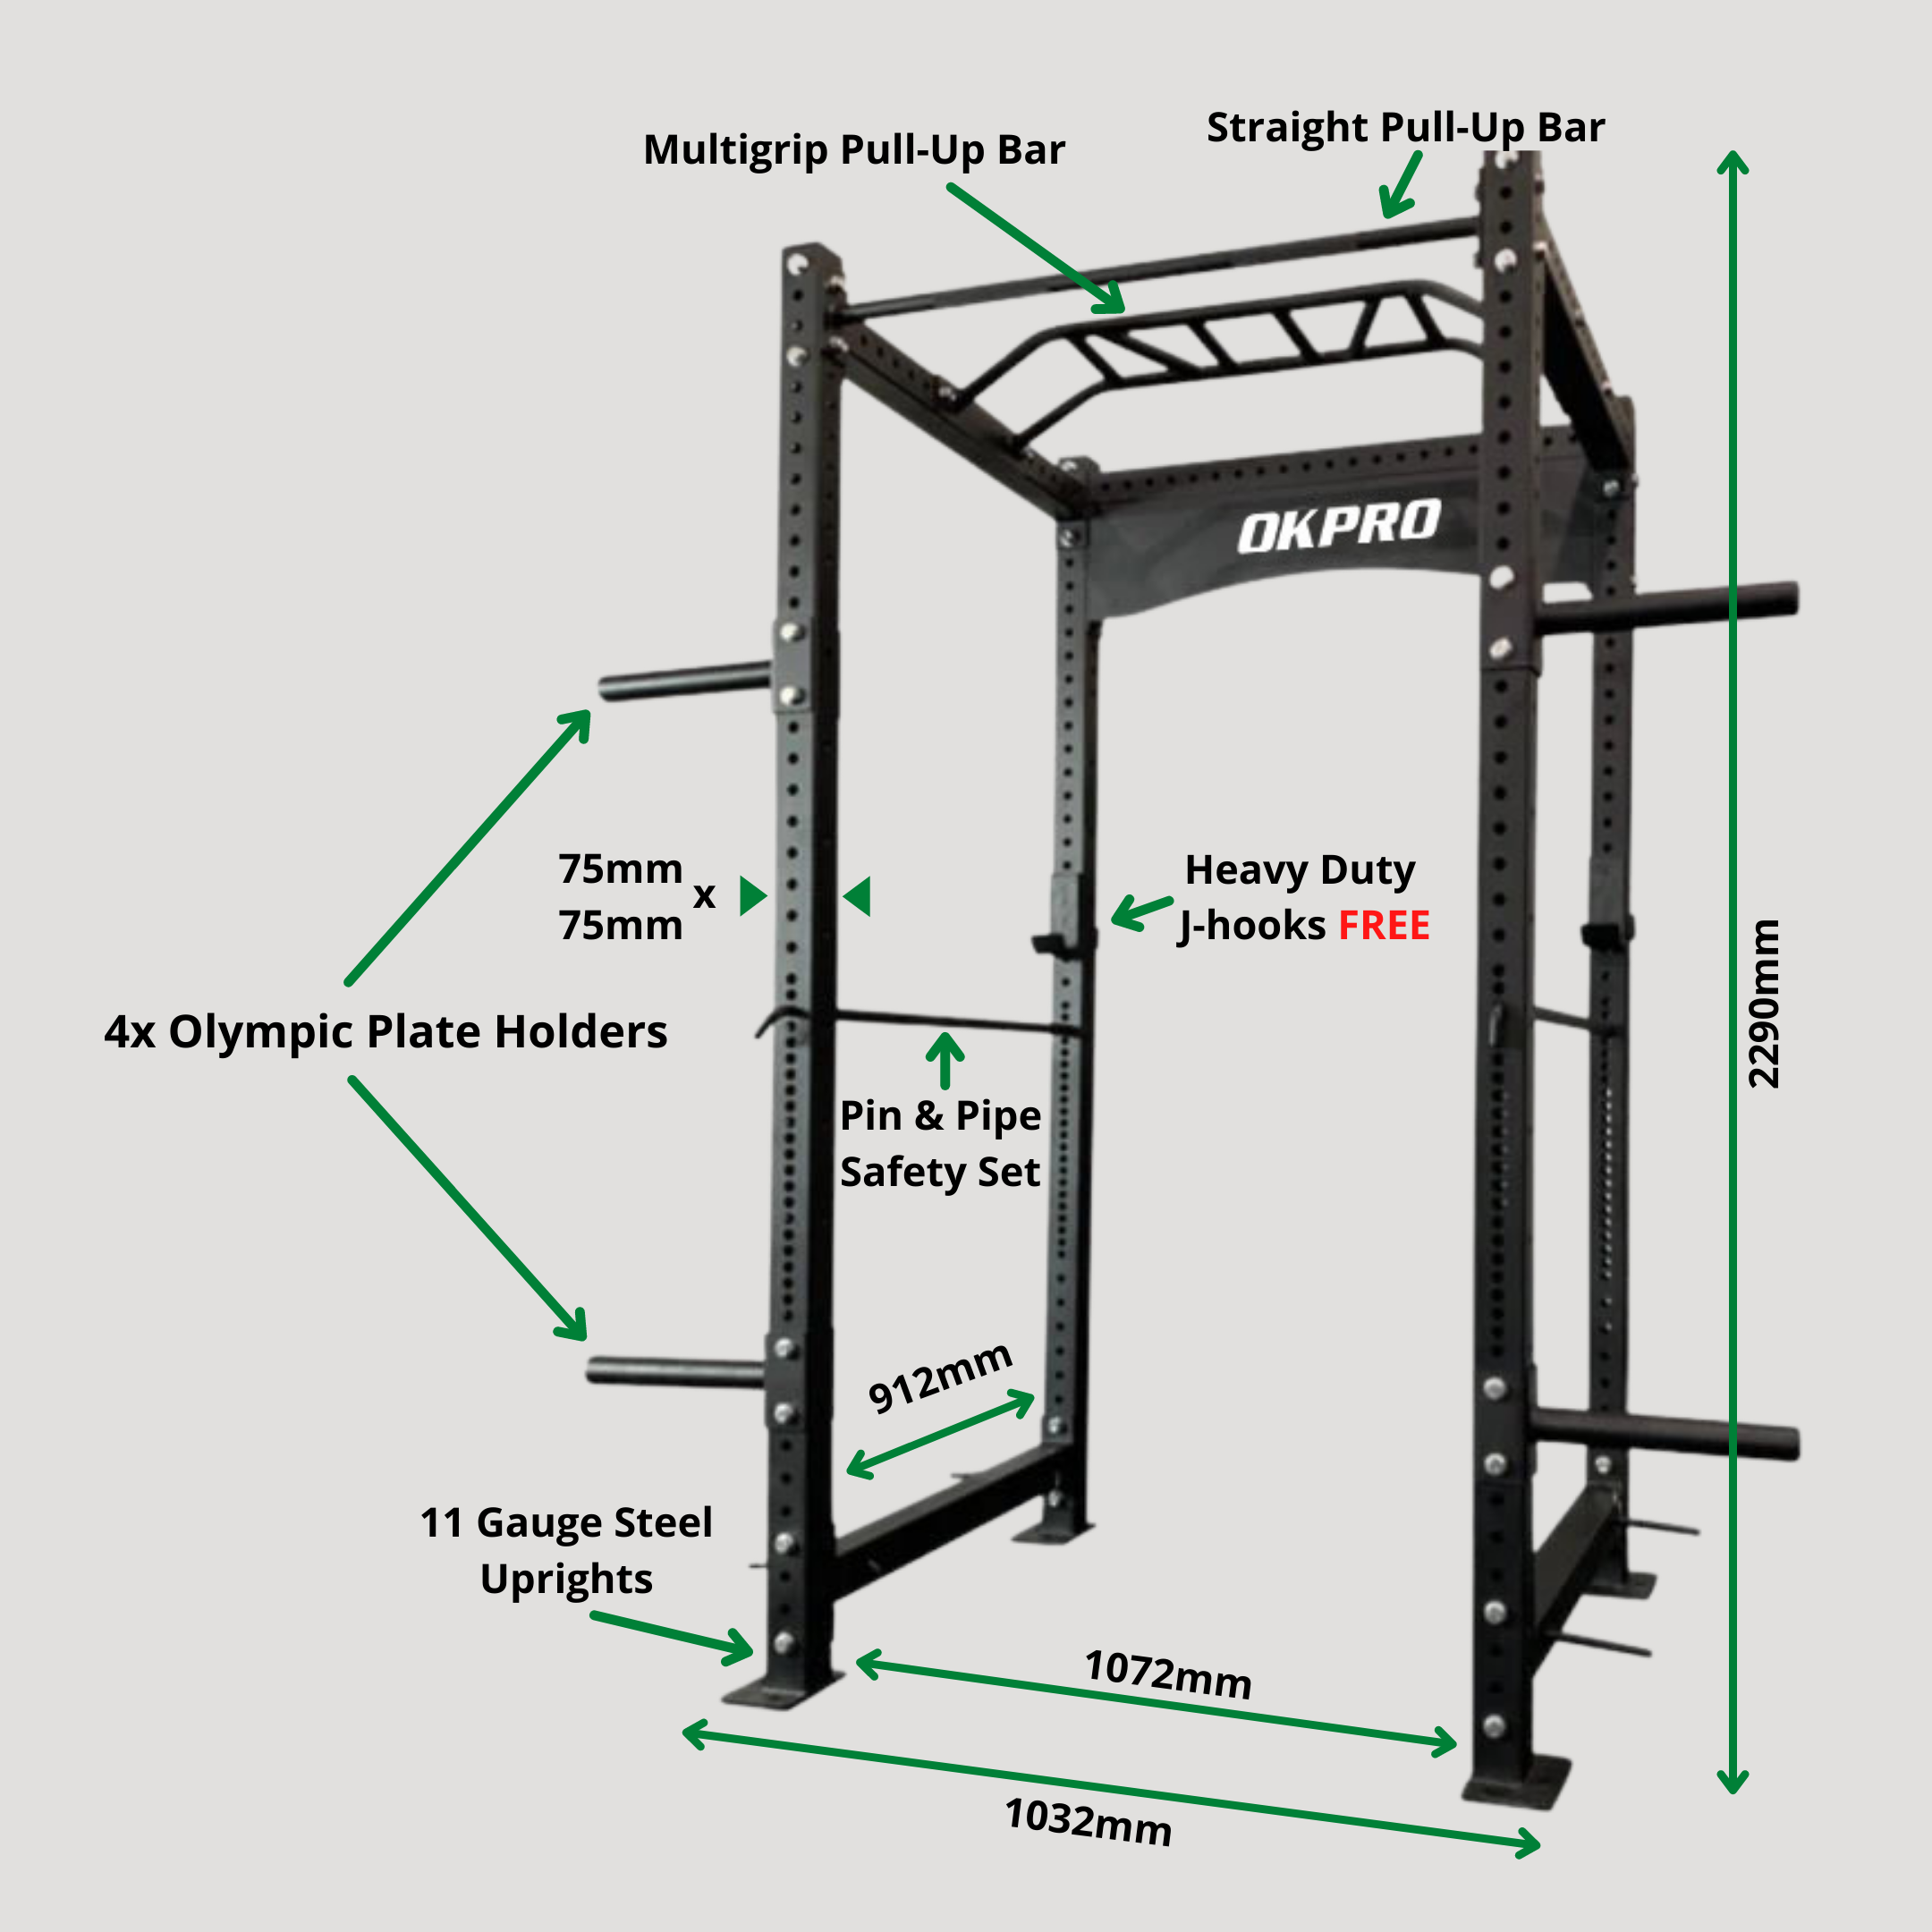 CF Commercial Power Rack | In Stock -Catch Fitness